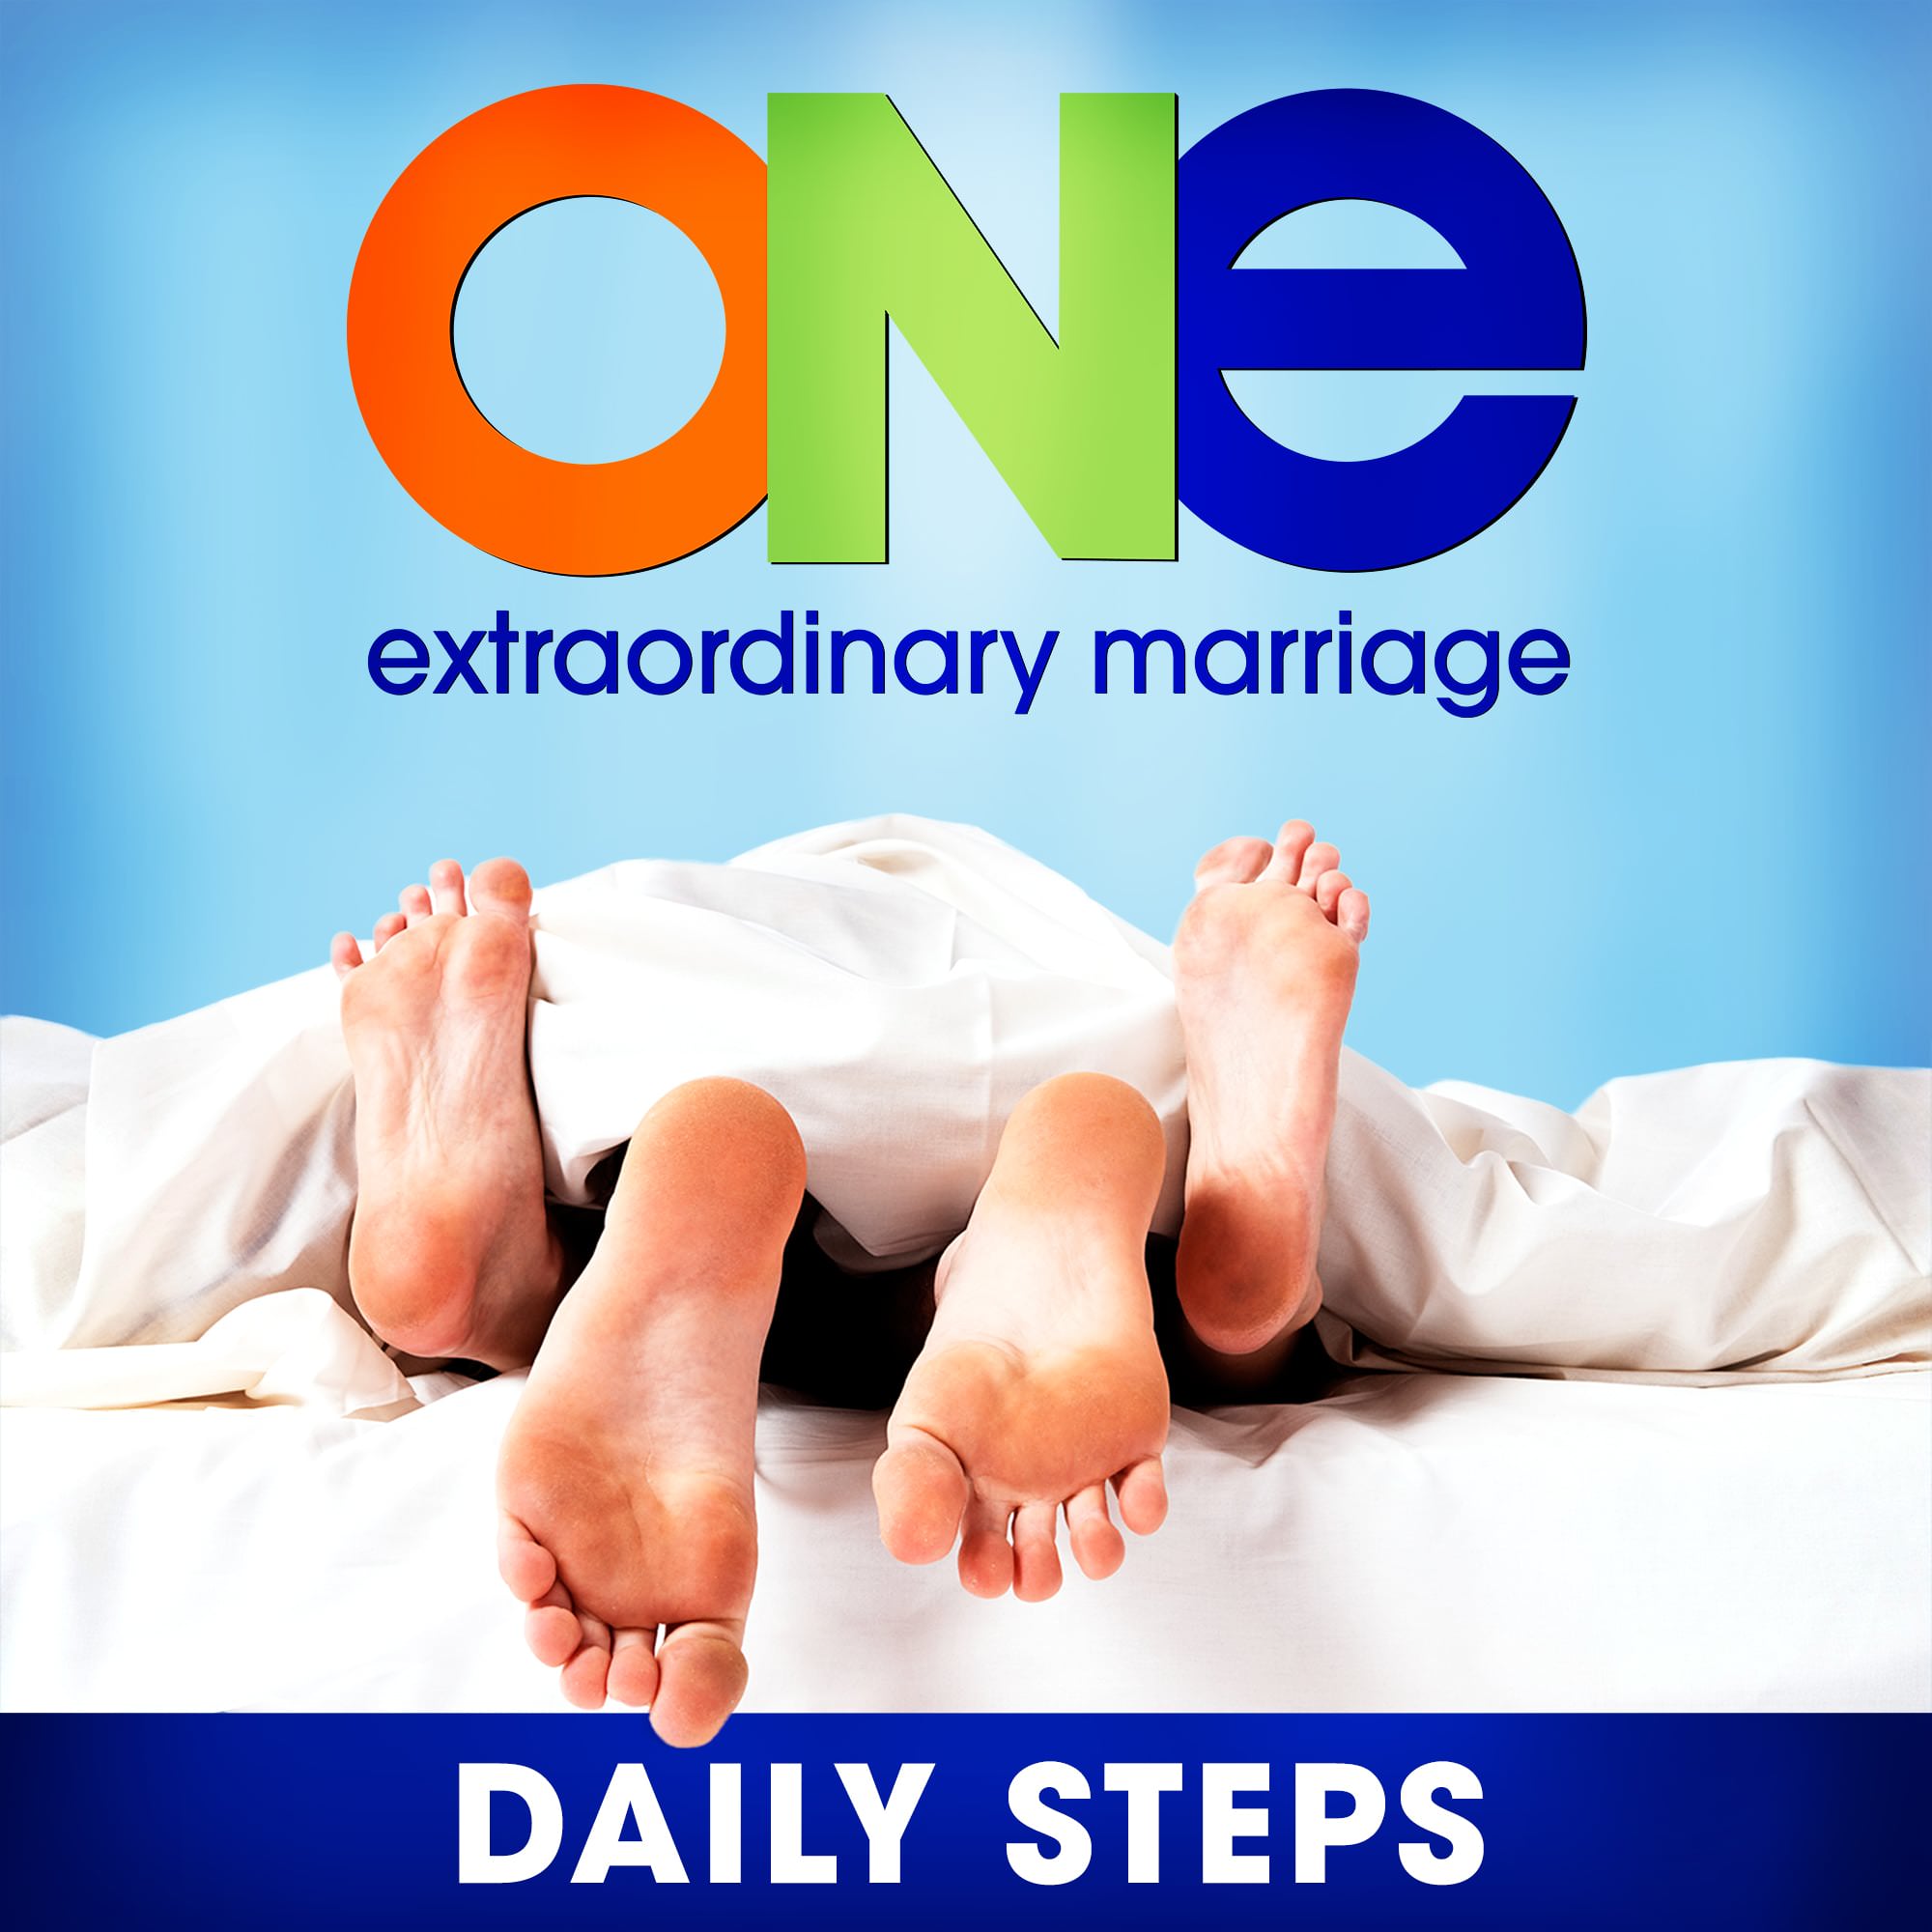 DS 062: What Can I Do to Spice Up My Marriage?